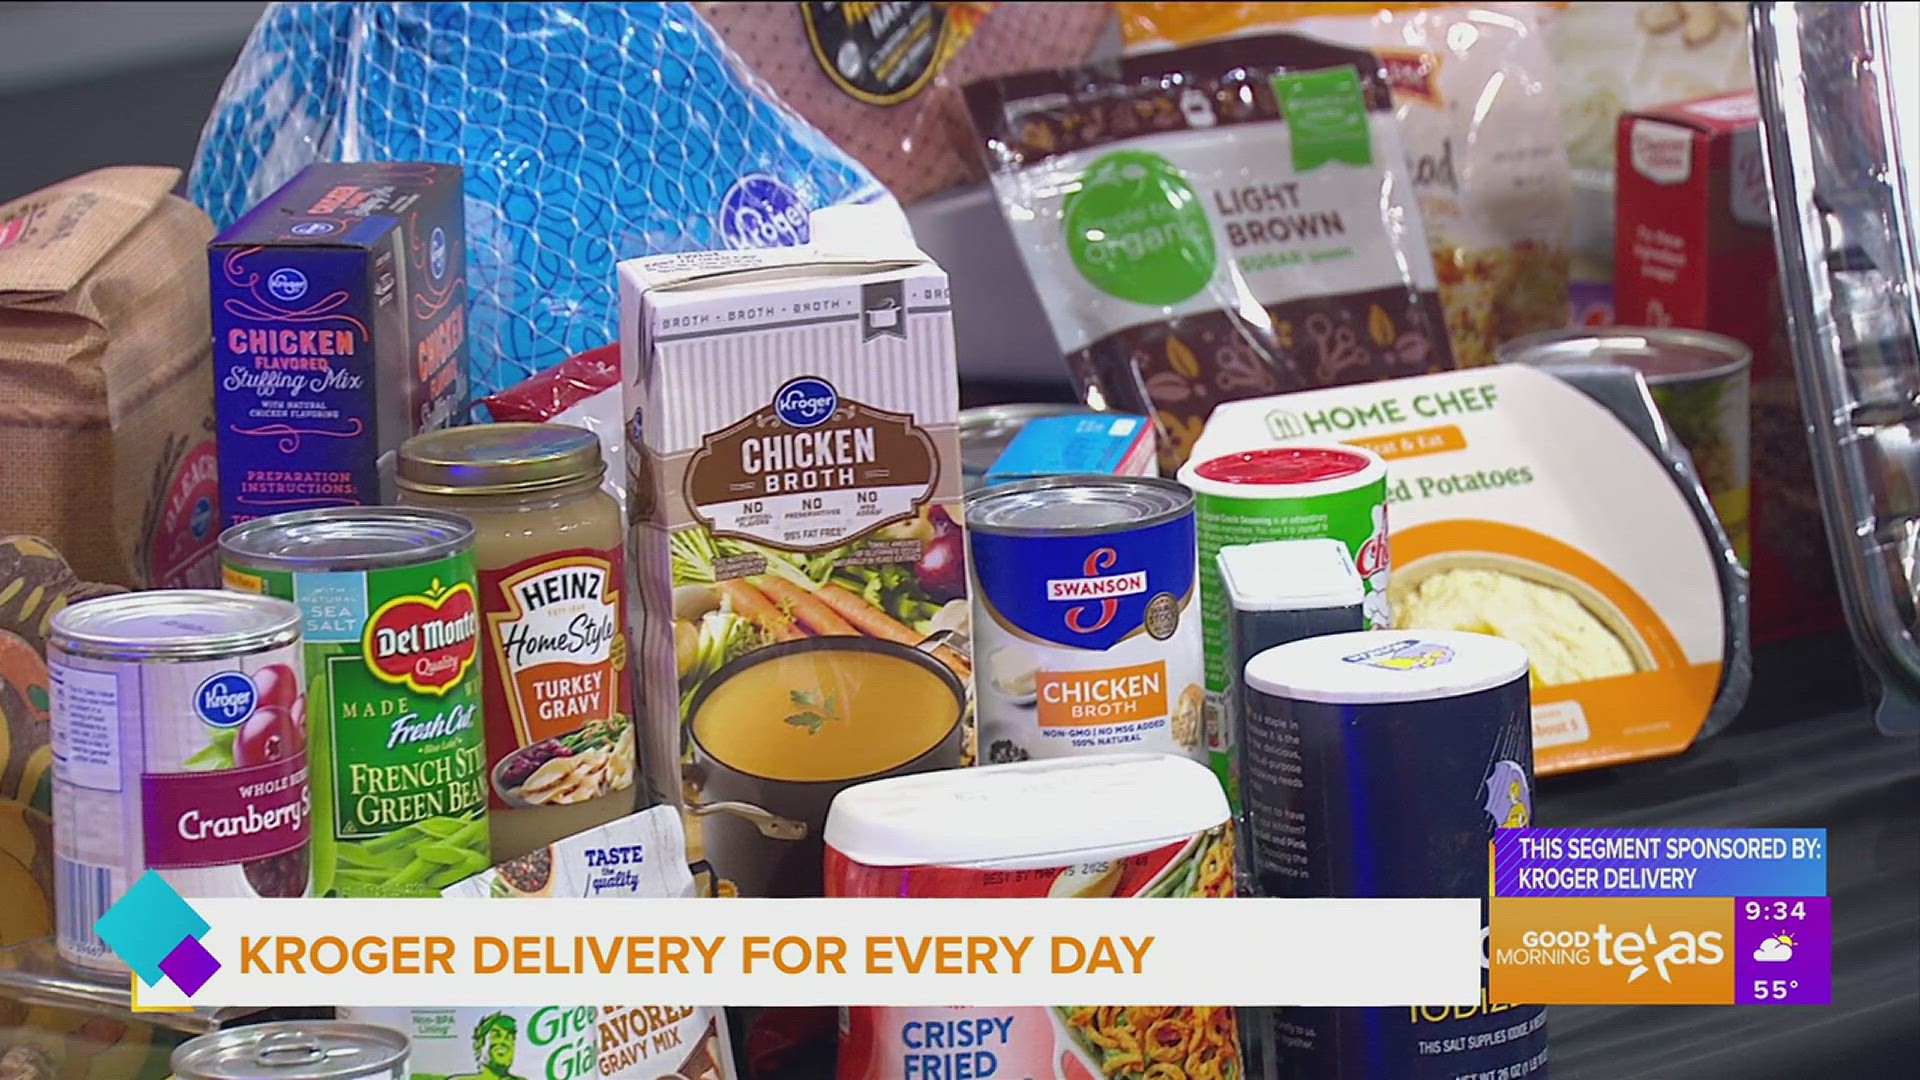 Learn about how Kroger can make Thanksgiving easier this season. This segment is sponsored by Kroger Delivery. Go to kroger.com for more information.